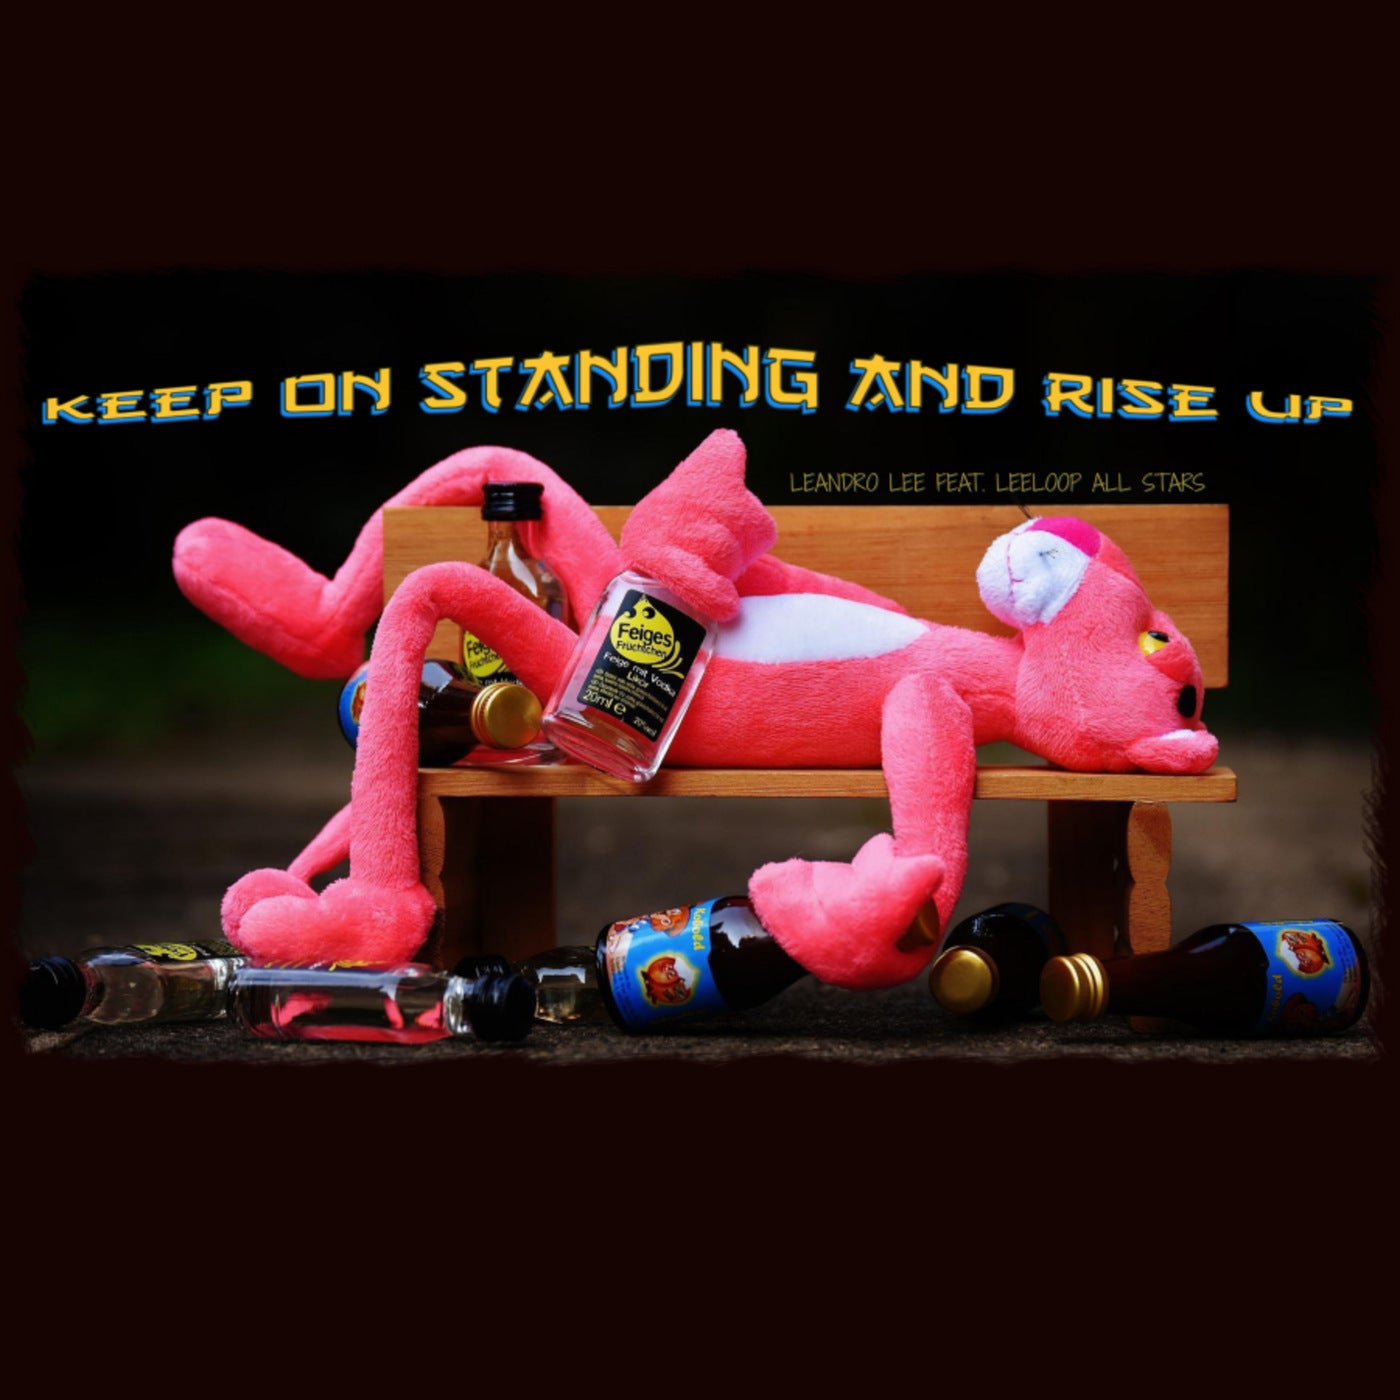 Keep on Standing and Rise Up